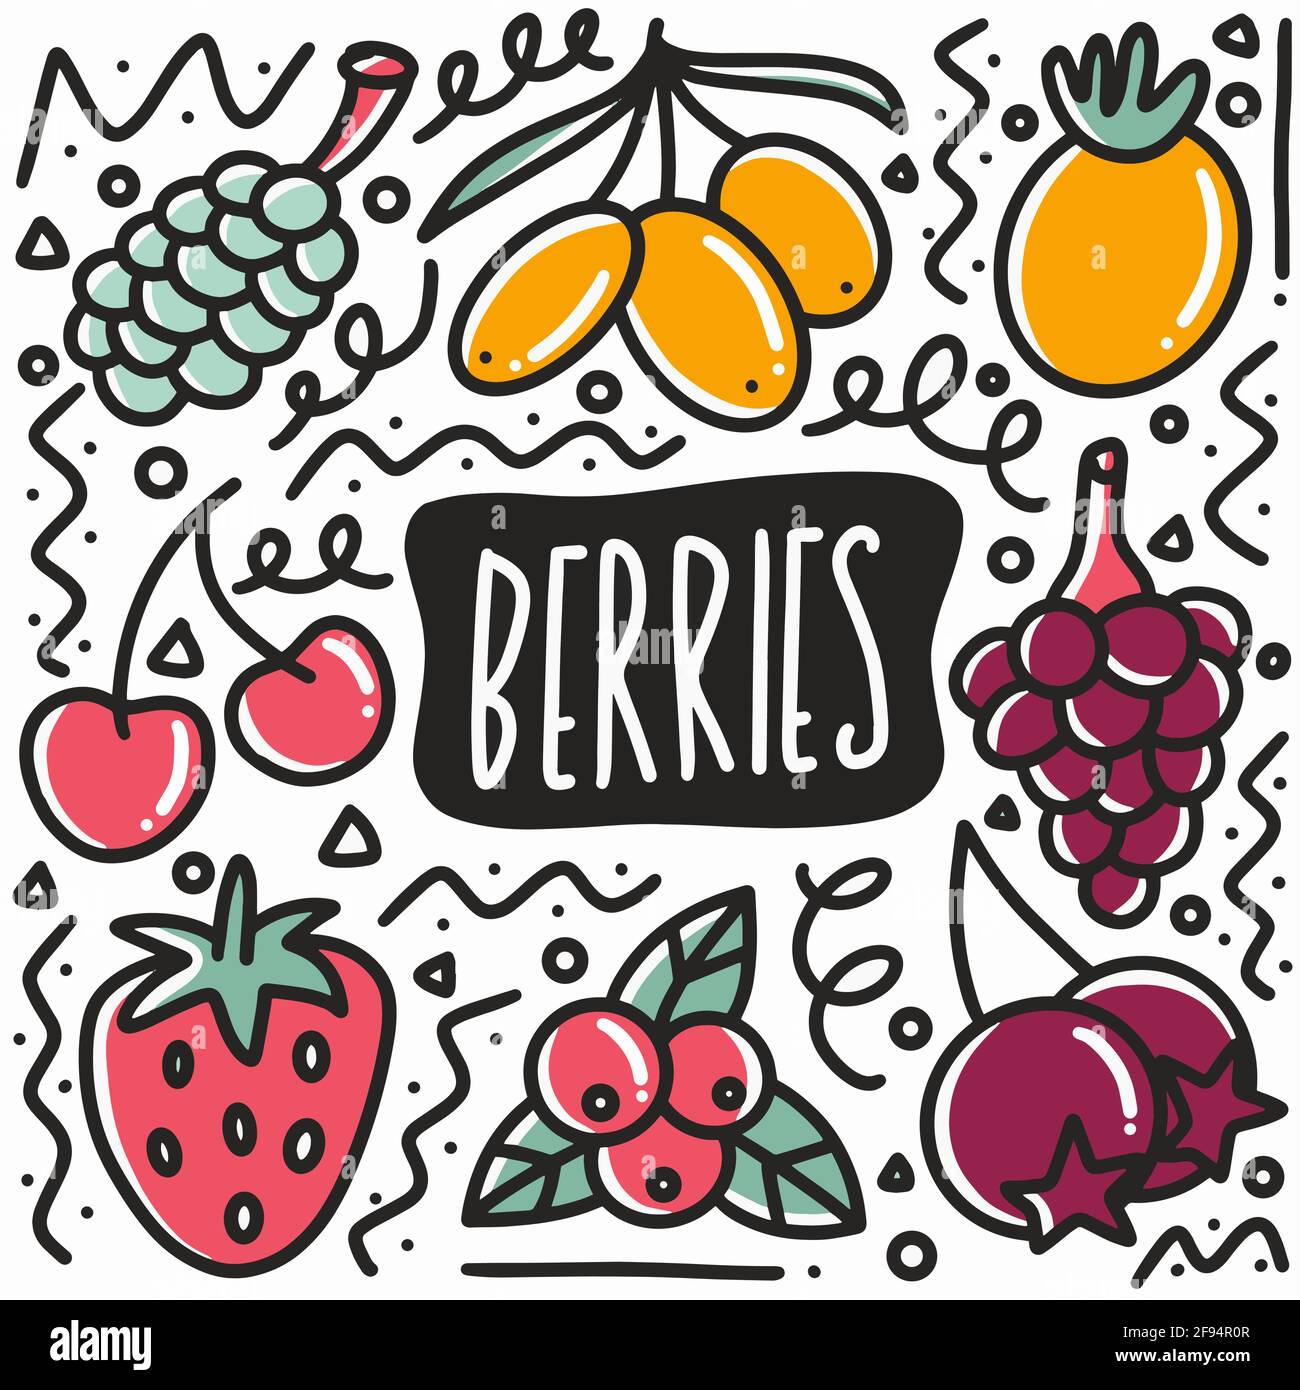 Household Doodle Items stock vector. Illustration of berry - 58265811